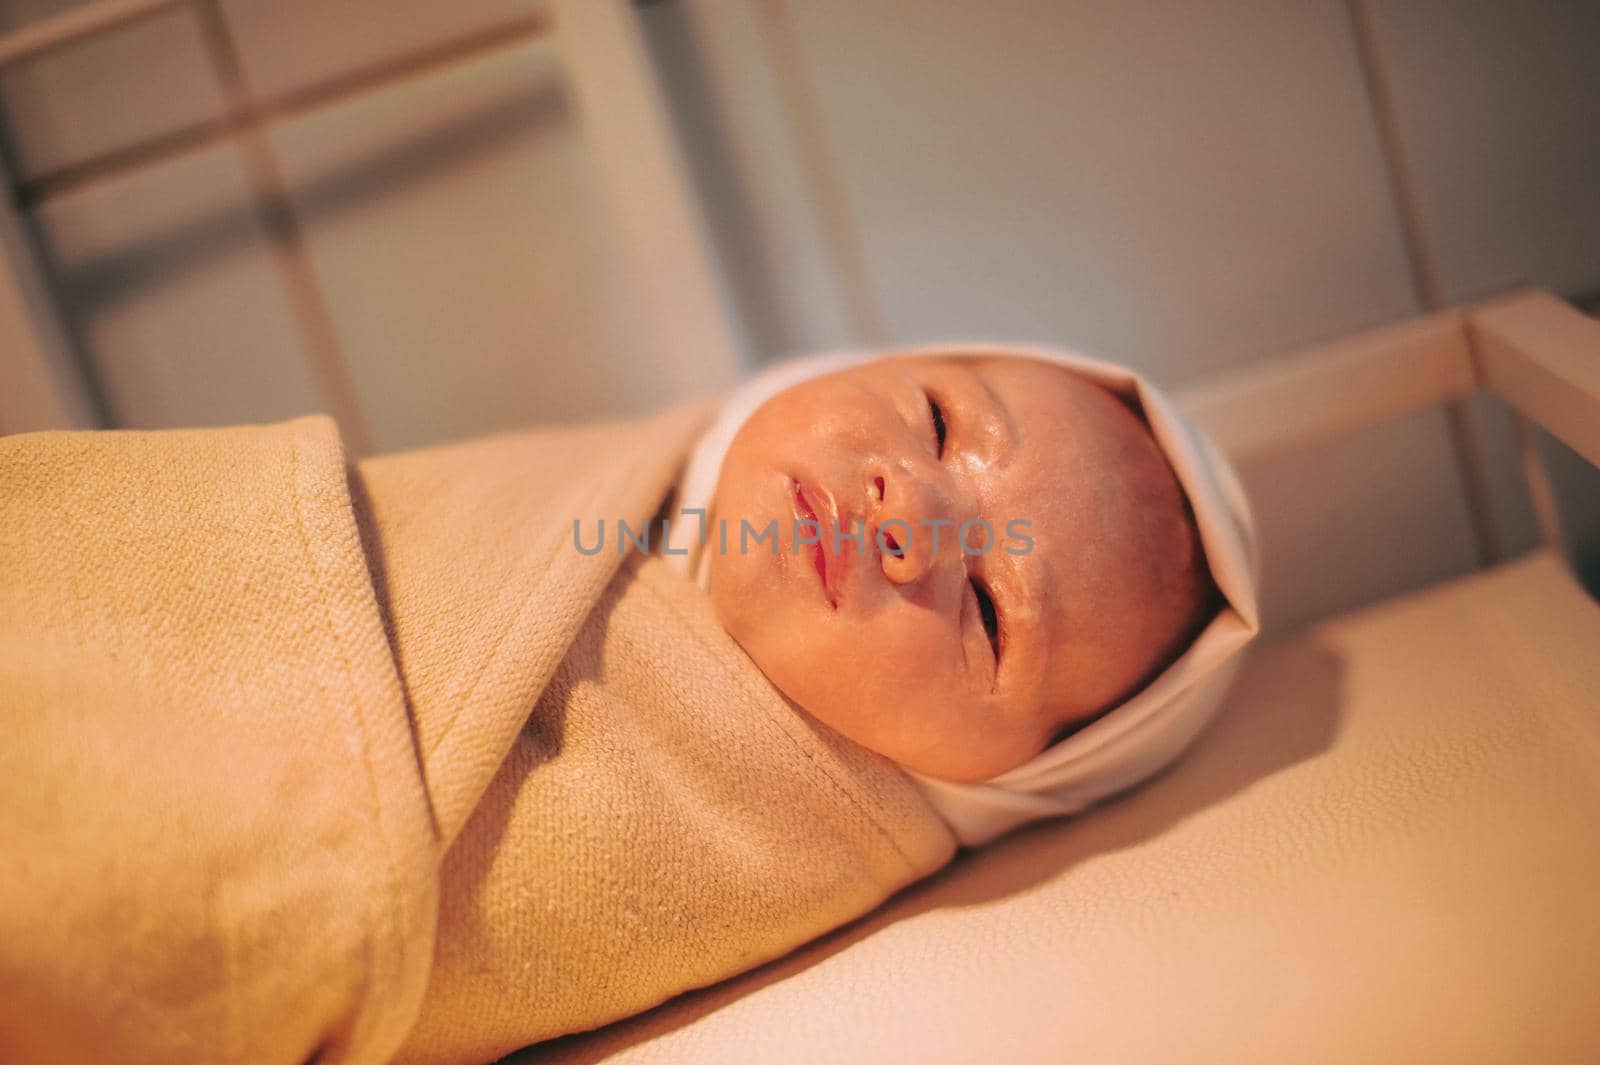 A newborn baby wrapped up after birth lies on the table.